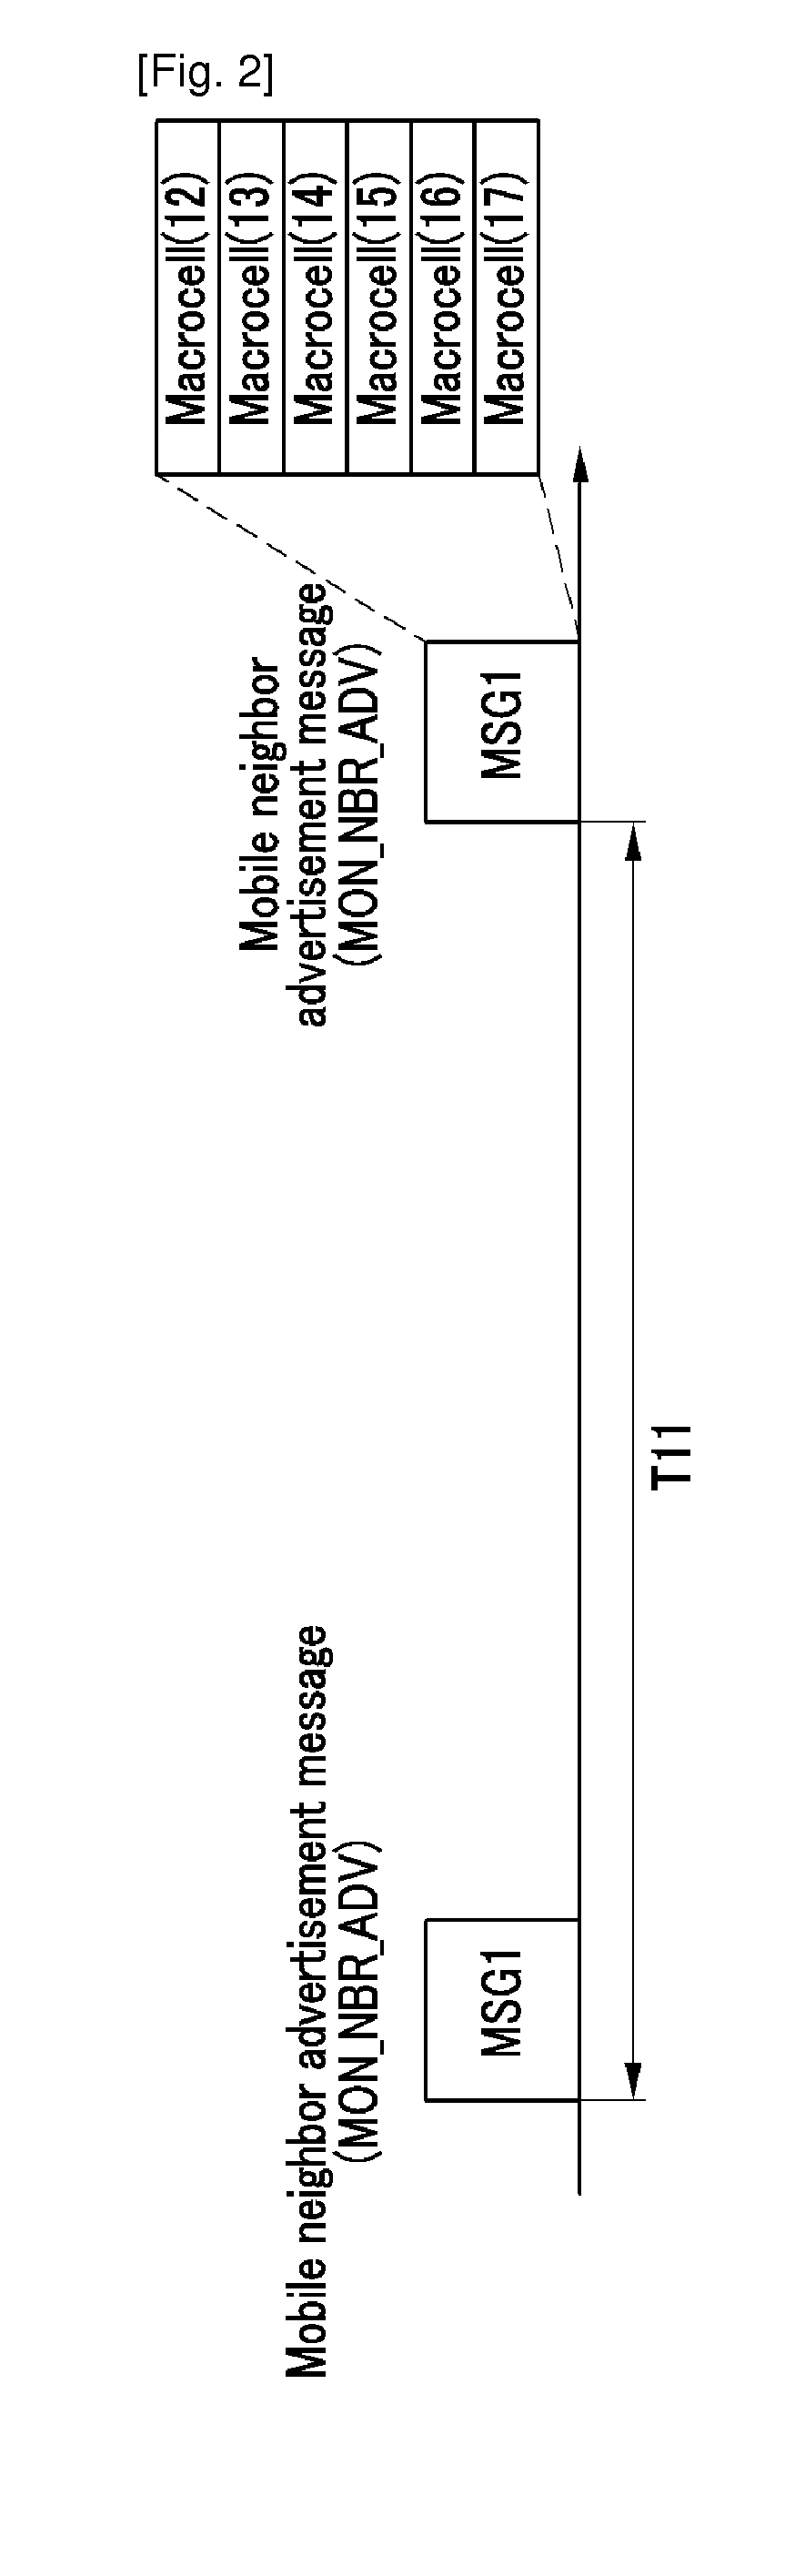 Method for managing neighbor base station list based on terminal location for efficient cell selection and handoff in macrocell environments with femtocell